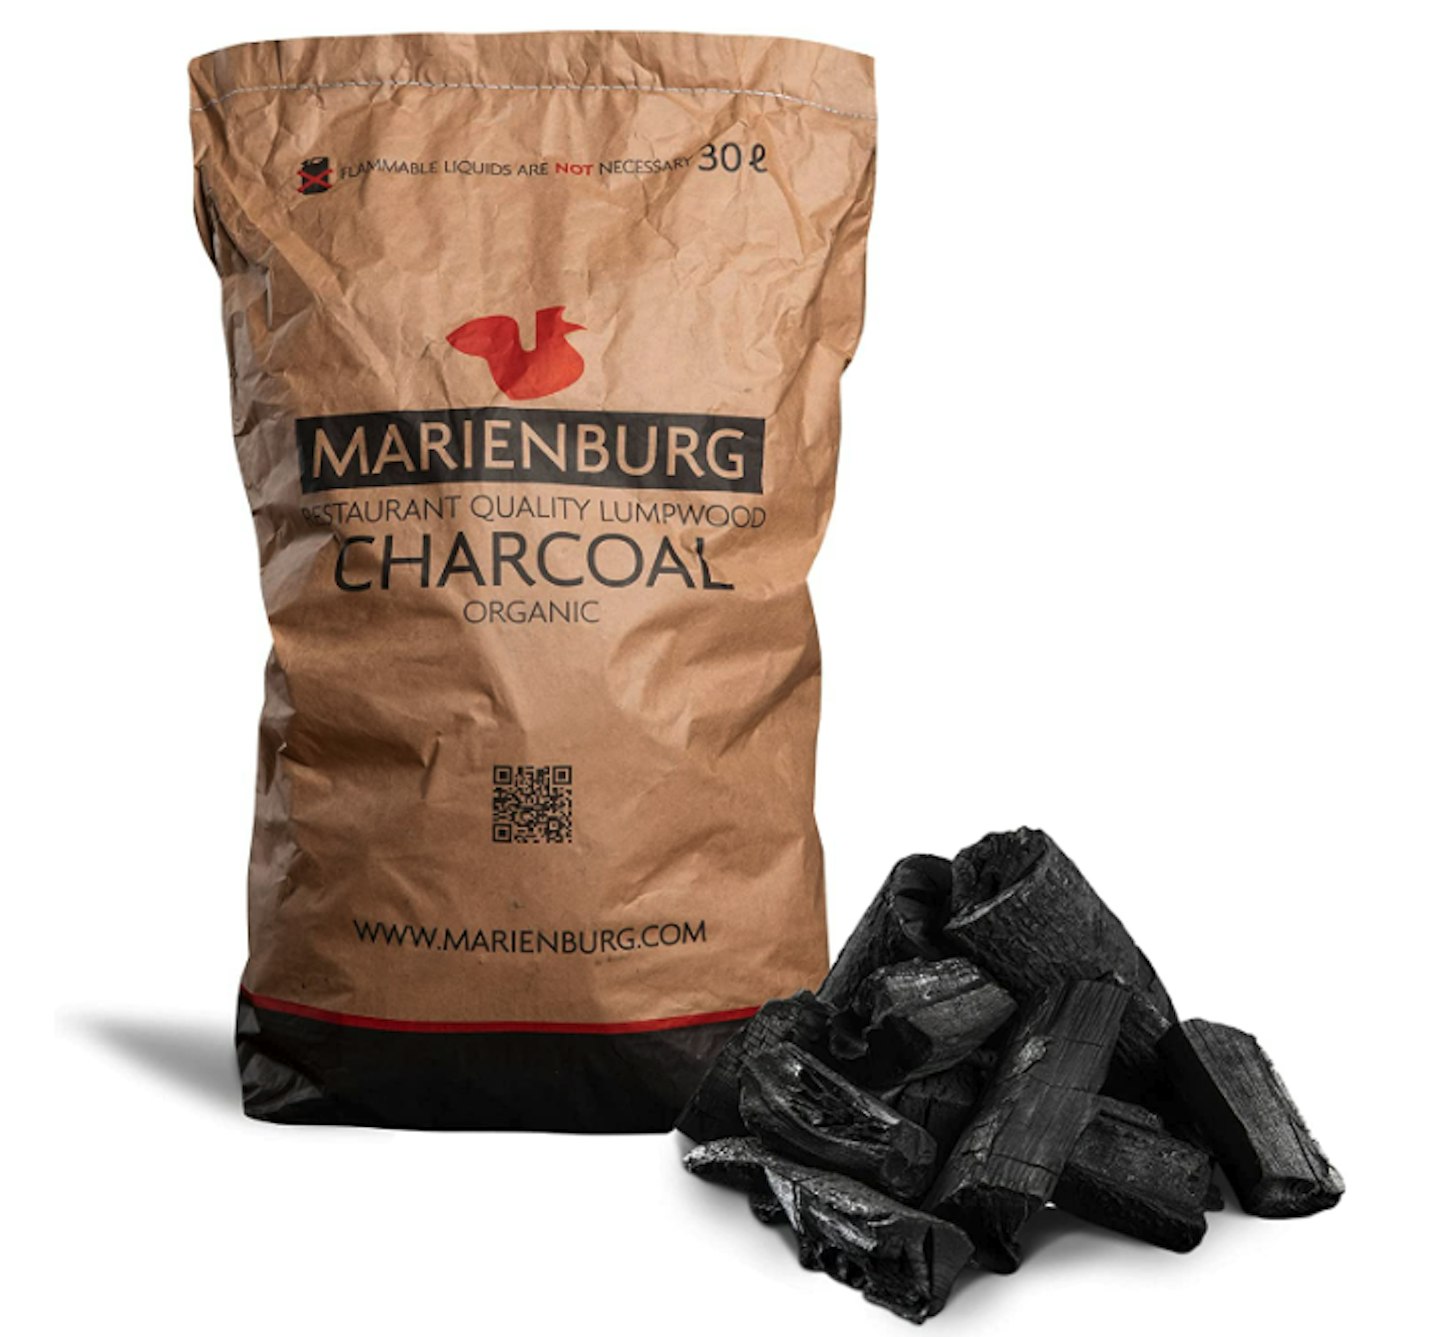 Marienburg Organic Restaurant Grade Lumpwood BBQ Charcoal for Barbecues and Pizza Ovens